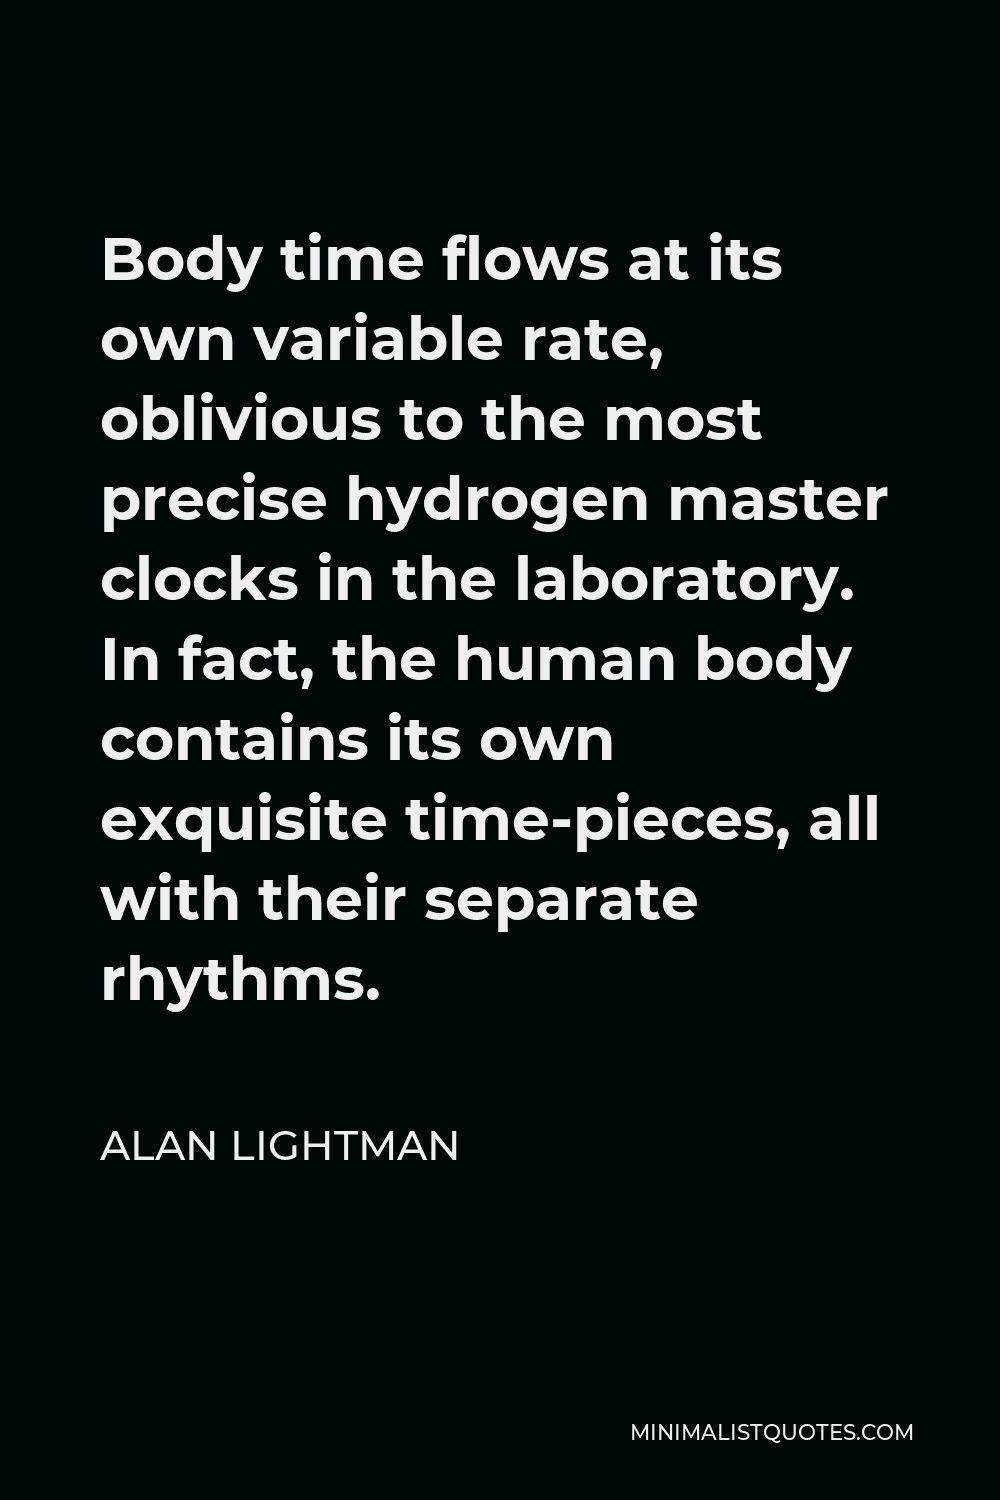 Alan Lightman Quote - Body time flows at its own variable rate, oblivious to the most precise hydrogen master clocks in the laboratory. In fact, the human body contains its own exquisite time-pieces, all with their separate rhythms.